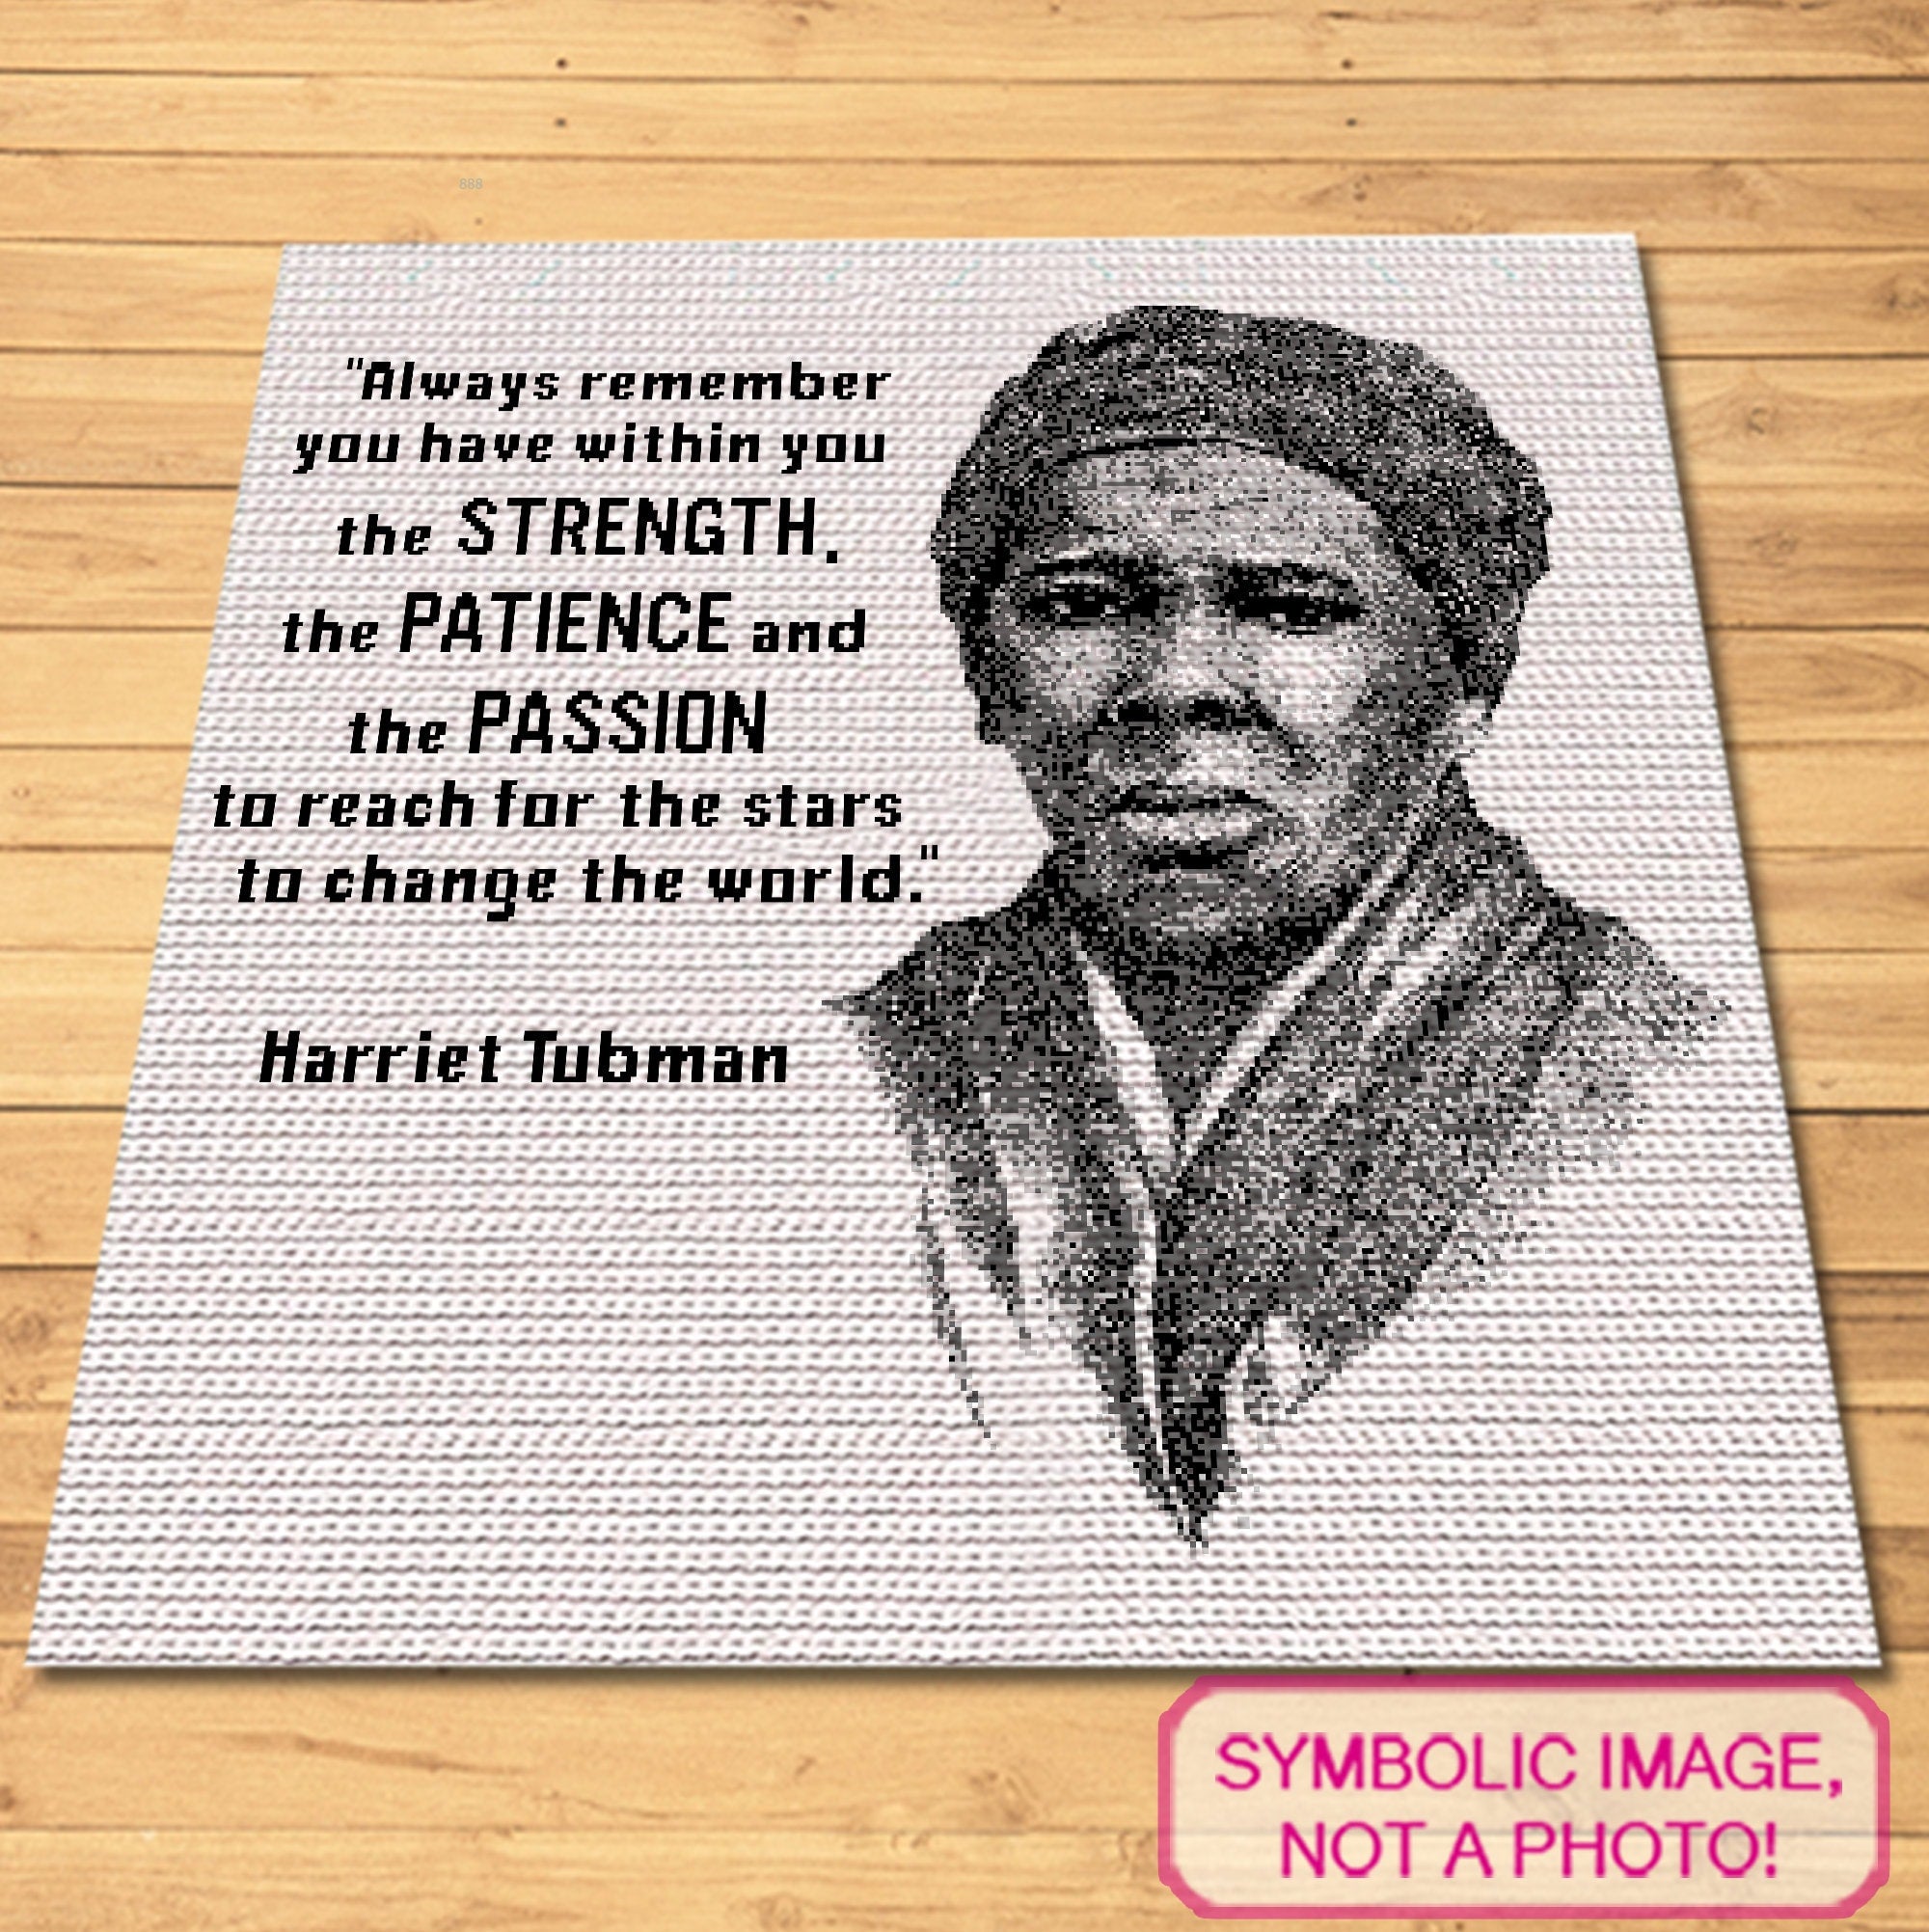 Harriet Tubman Crochet Blanket Pattern - Weave a Tribute to Courage and Freedom! This captivating pattern features a beautiful portrait of Harriet Tubman, an icon of strength, patience, and passion. Crochet a blanket that honors her legacy and the fight for freedom. With detailed instructions and a touching quote, stitch a masterpiece that celebrates her indomitable spirit. Click to learn more!